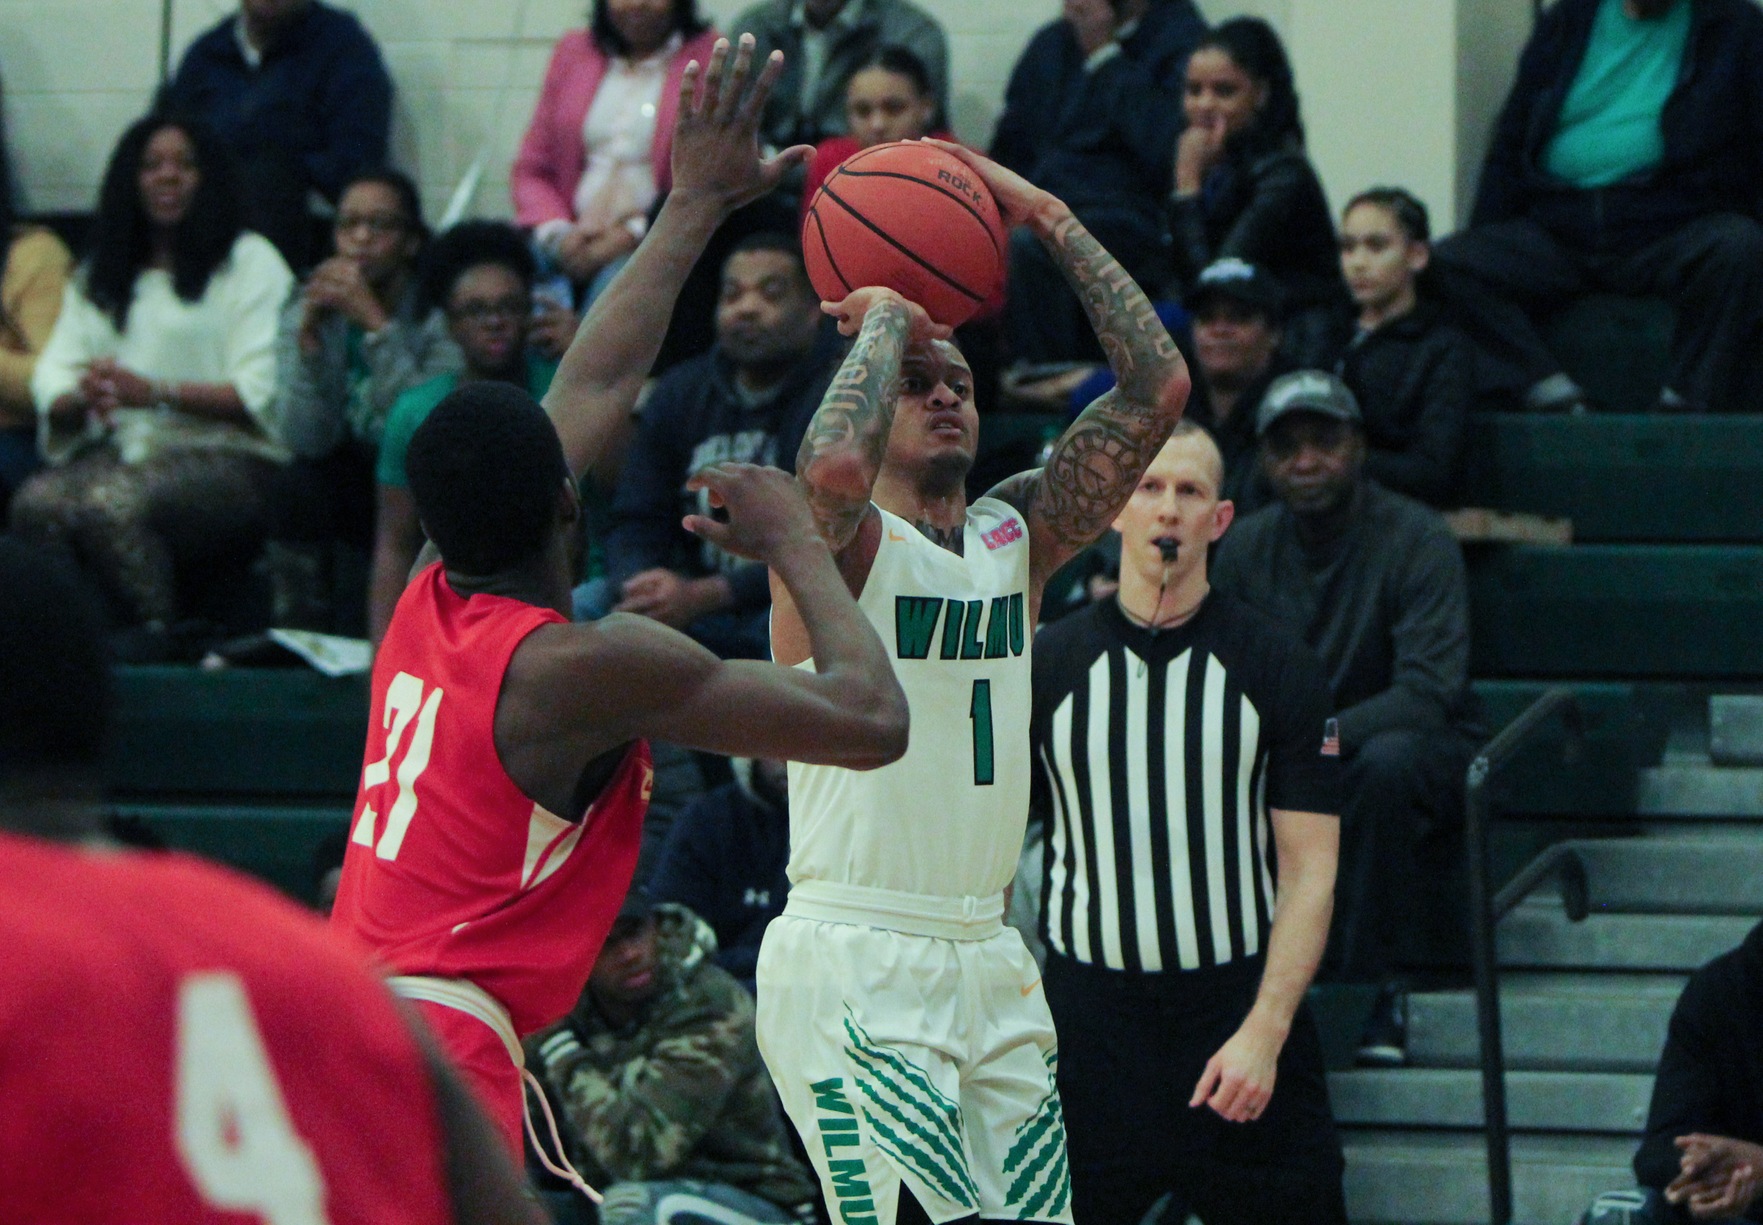 Photo of Jermaine Head who scored 34 points and added 10 assists against Chestnut Hill. Copyright 2020; Wilmington University. All rights reserved. Photo by Samantha Kelley. February 4, 2020 vs. Chestnut Hill.